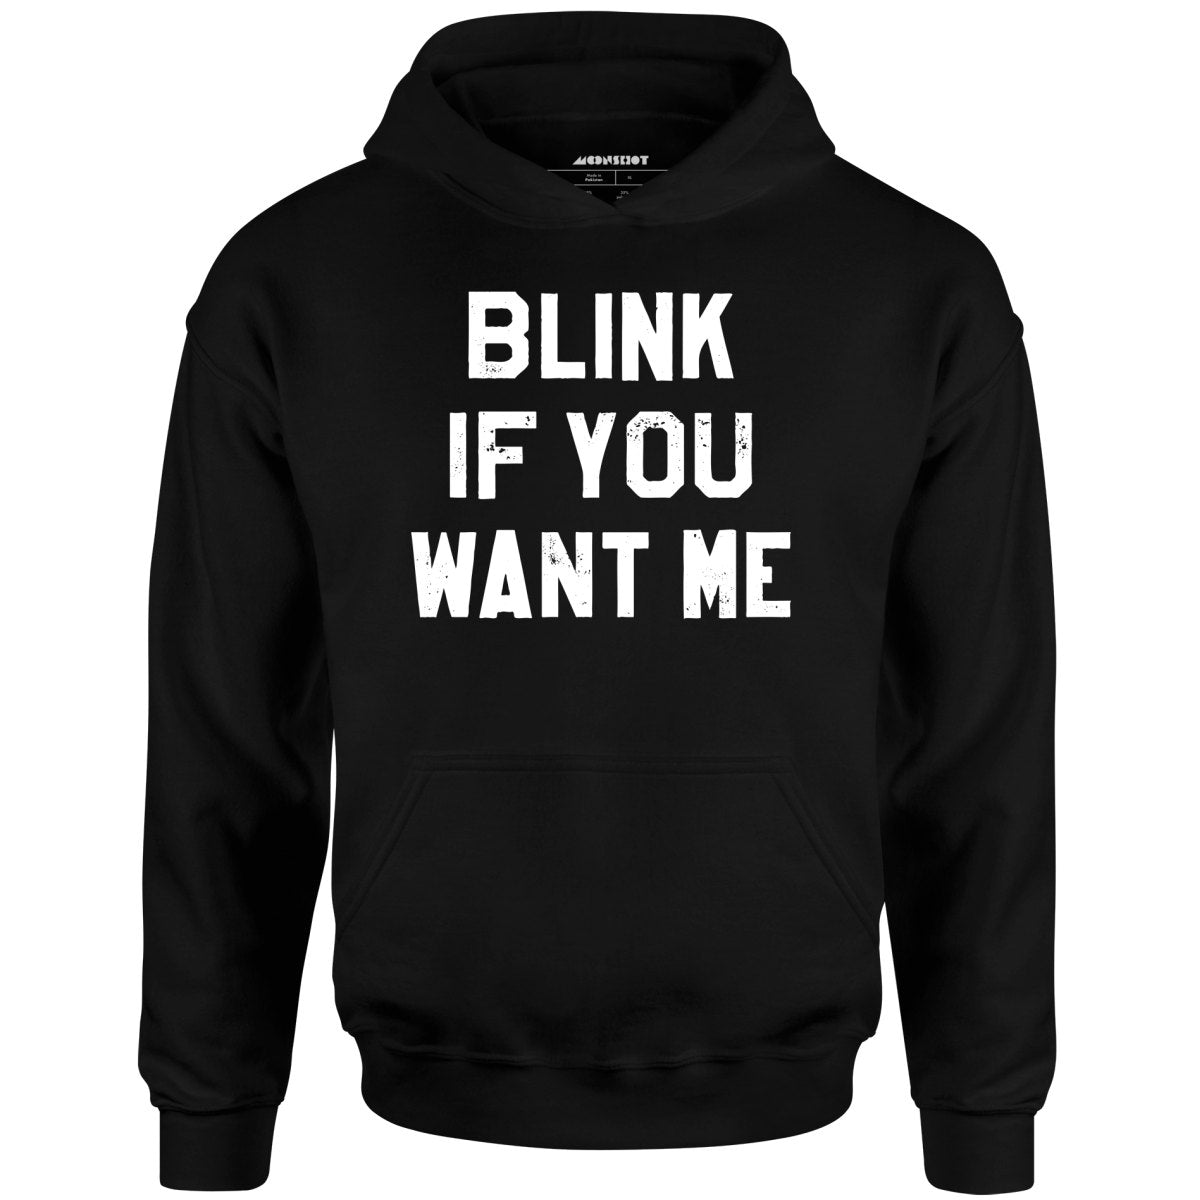 Blink If You Want Me - Unisex Hoodie